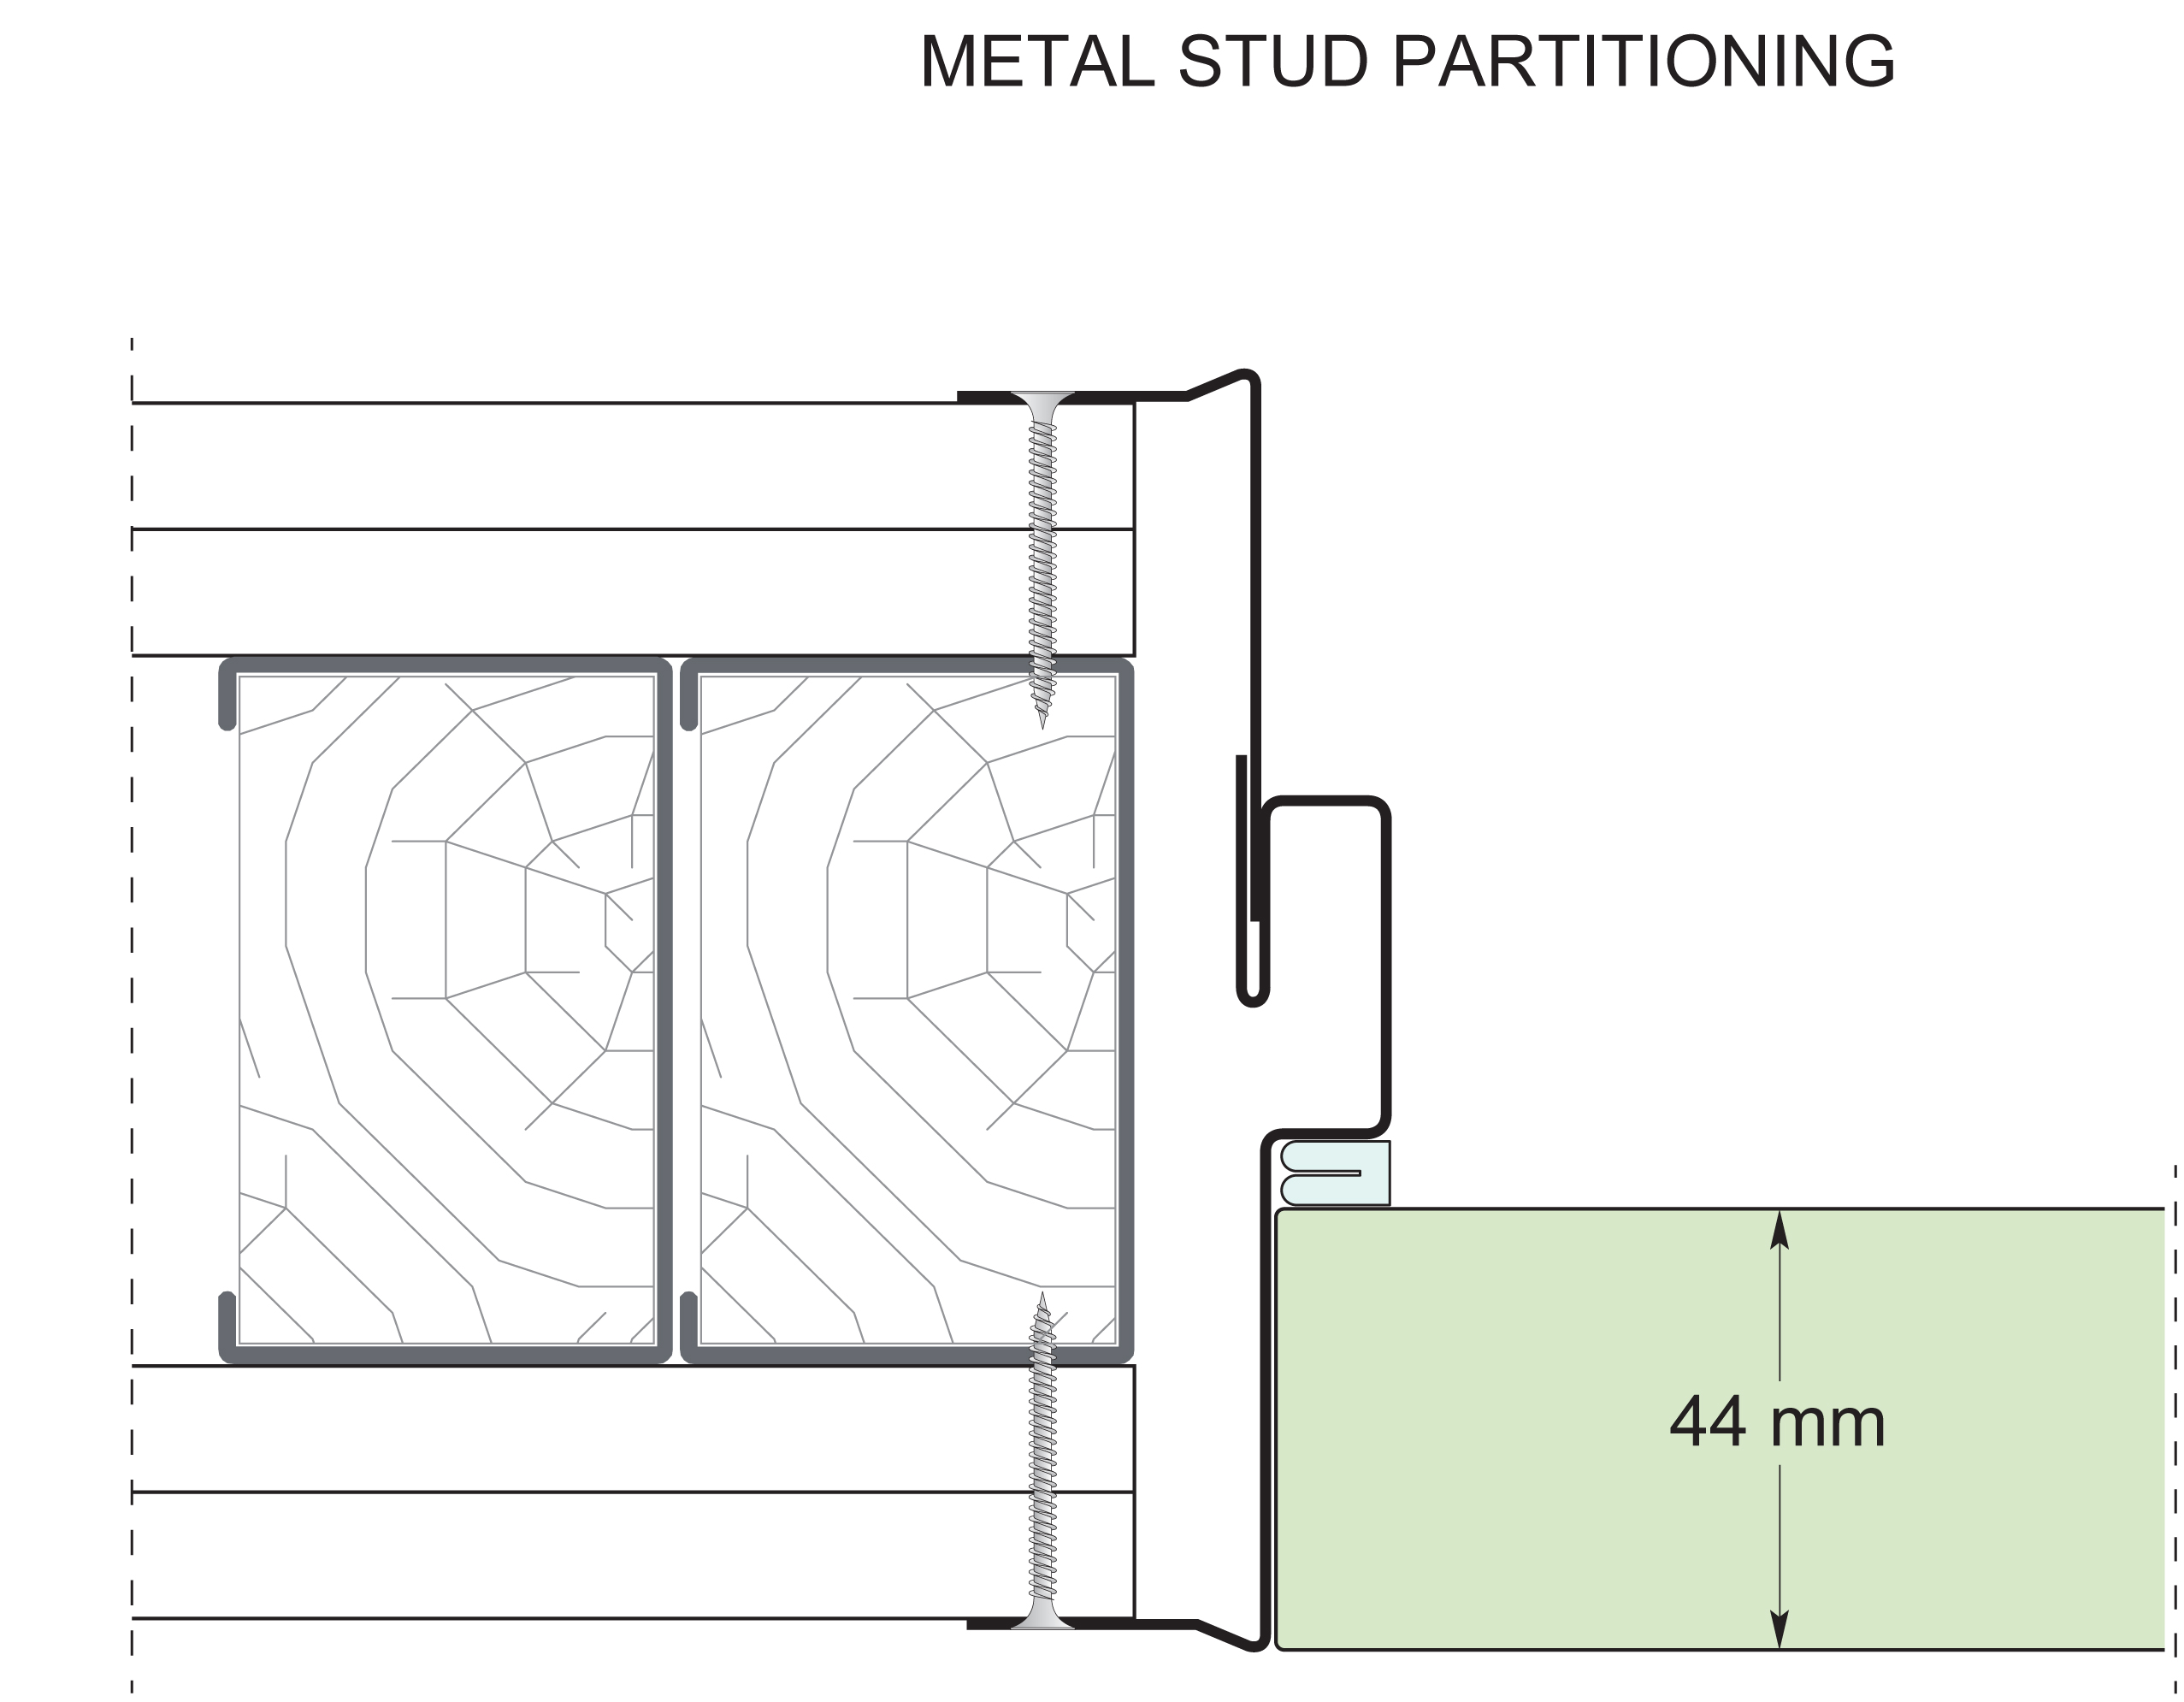 timber stud partitioning